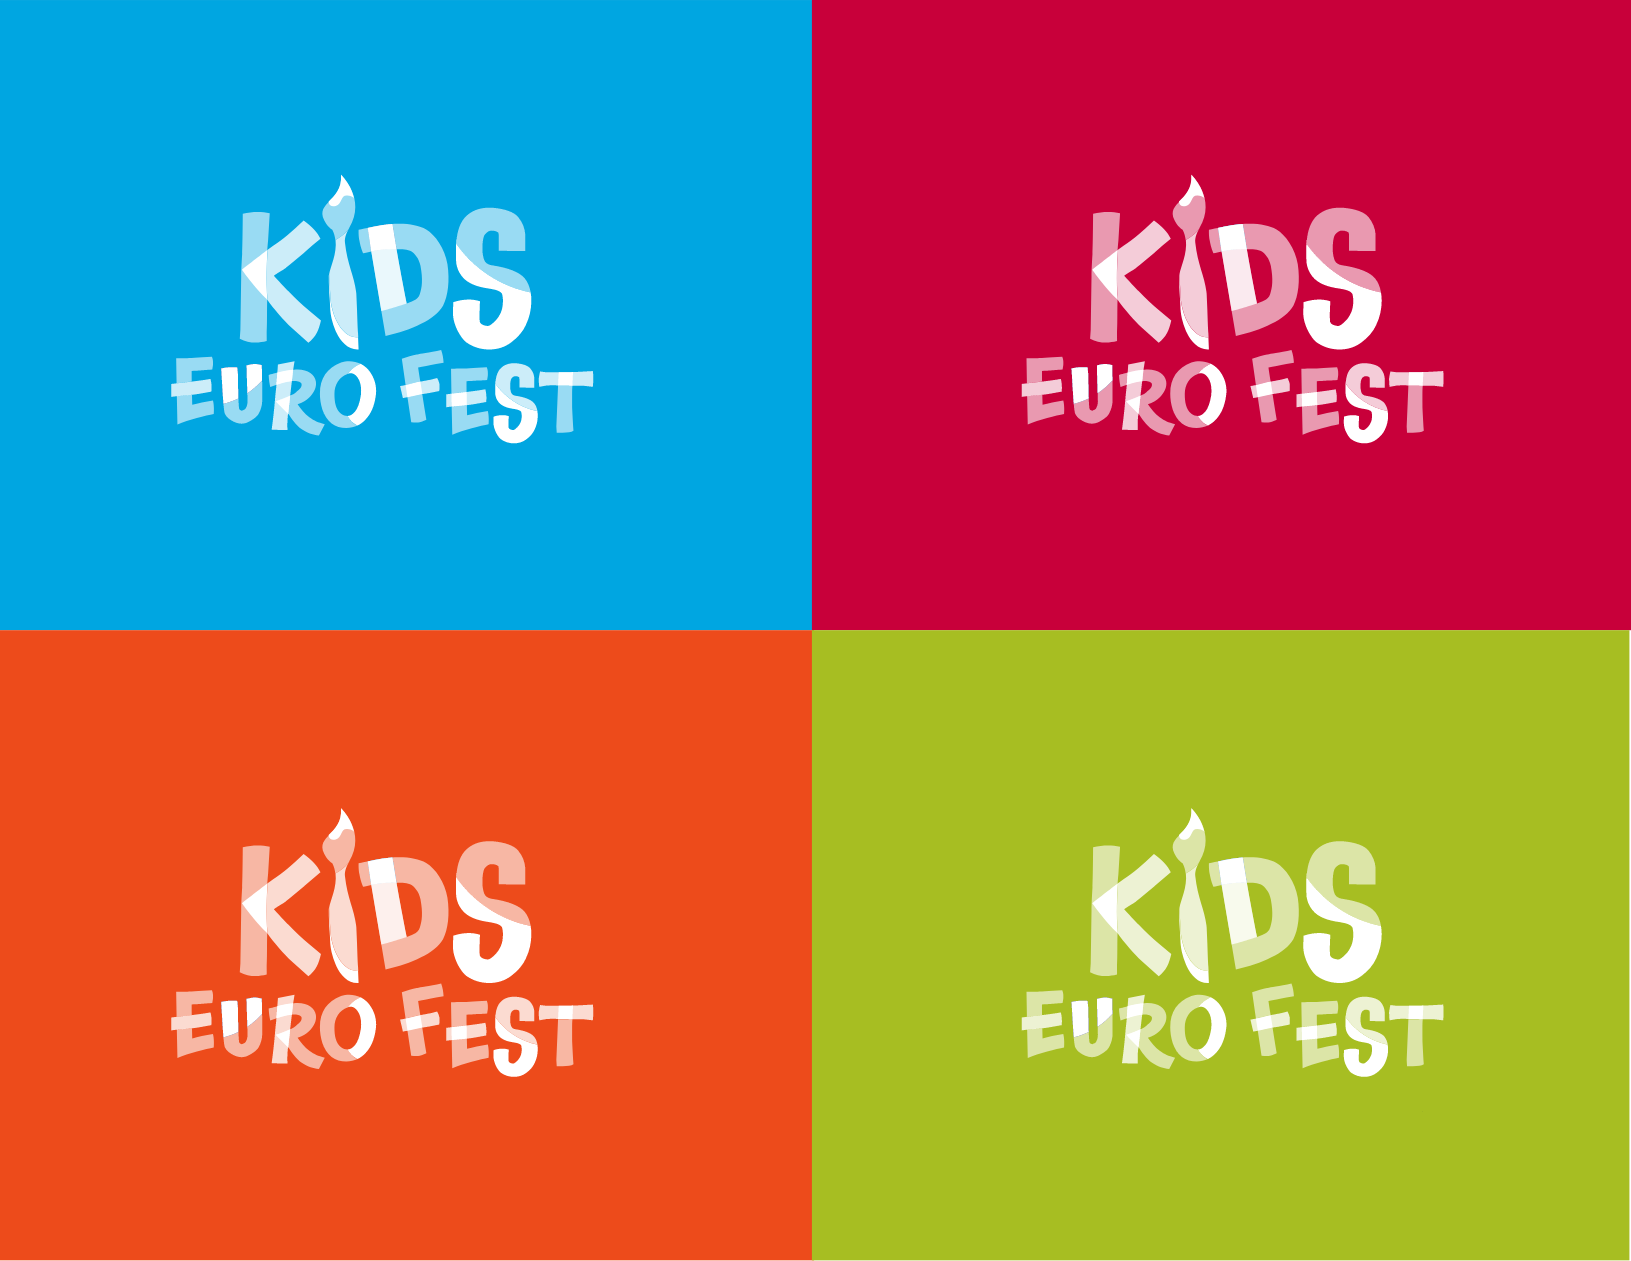 Colorful collage showcasing the DEU Kids Euro Fest logo in four variations, each set against a vibrant background of blue, red, orange, and green.